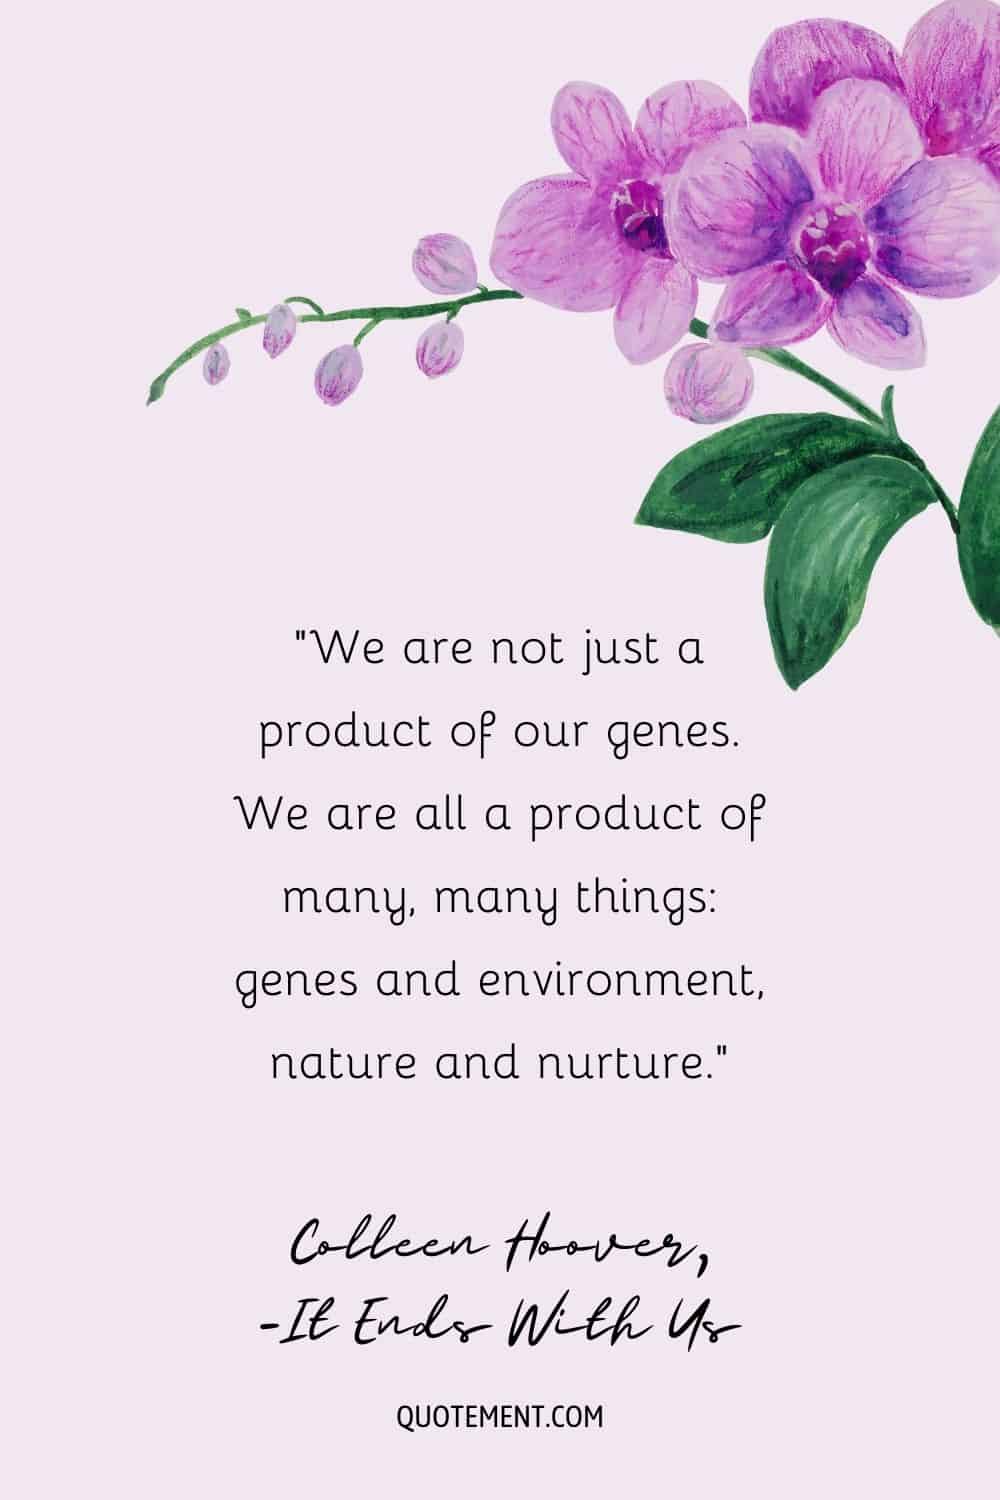 We are not just a product of our genes quote from It ends with us.
